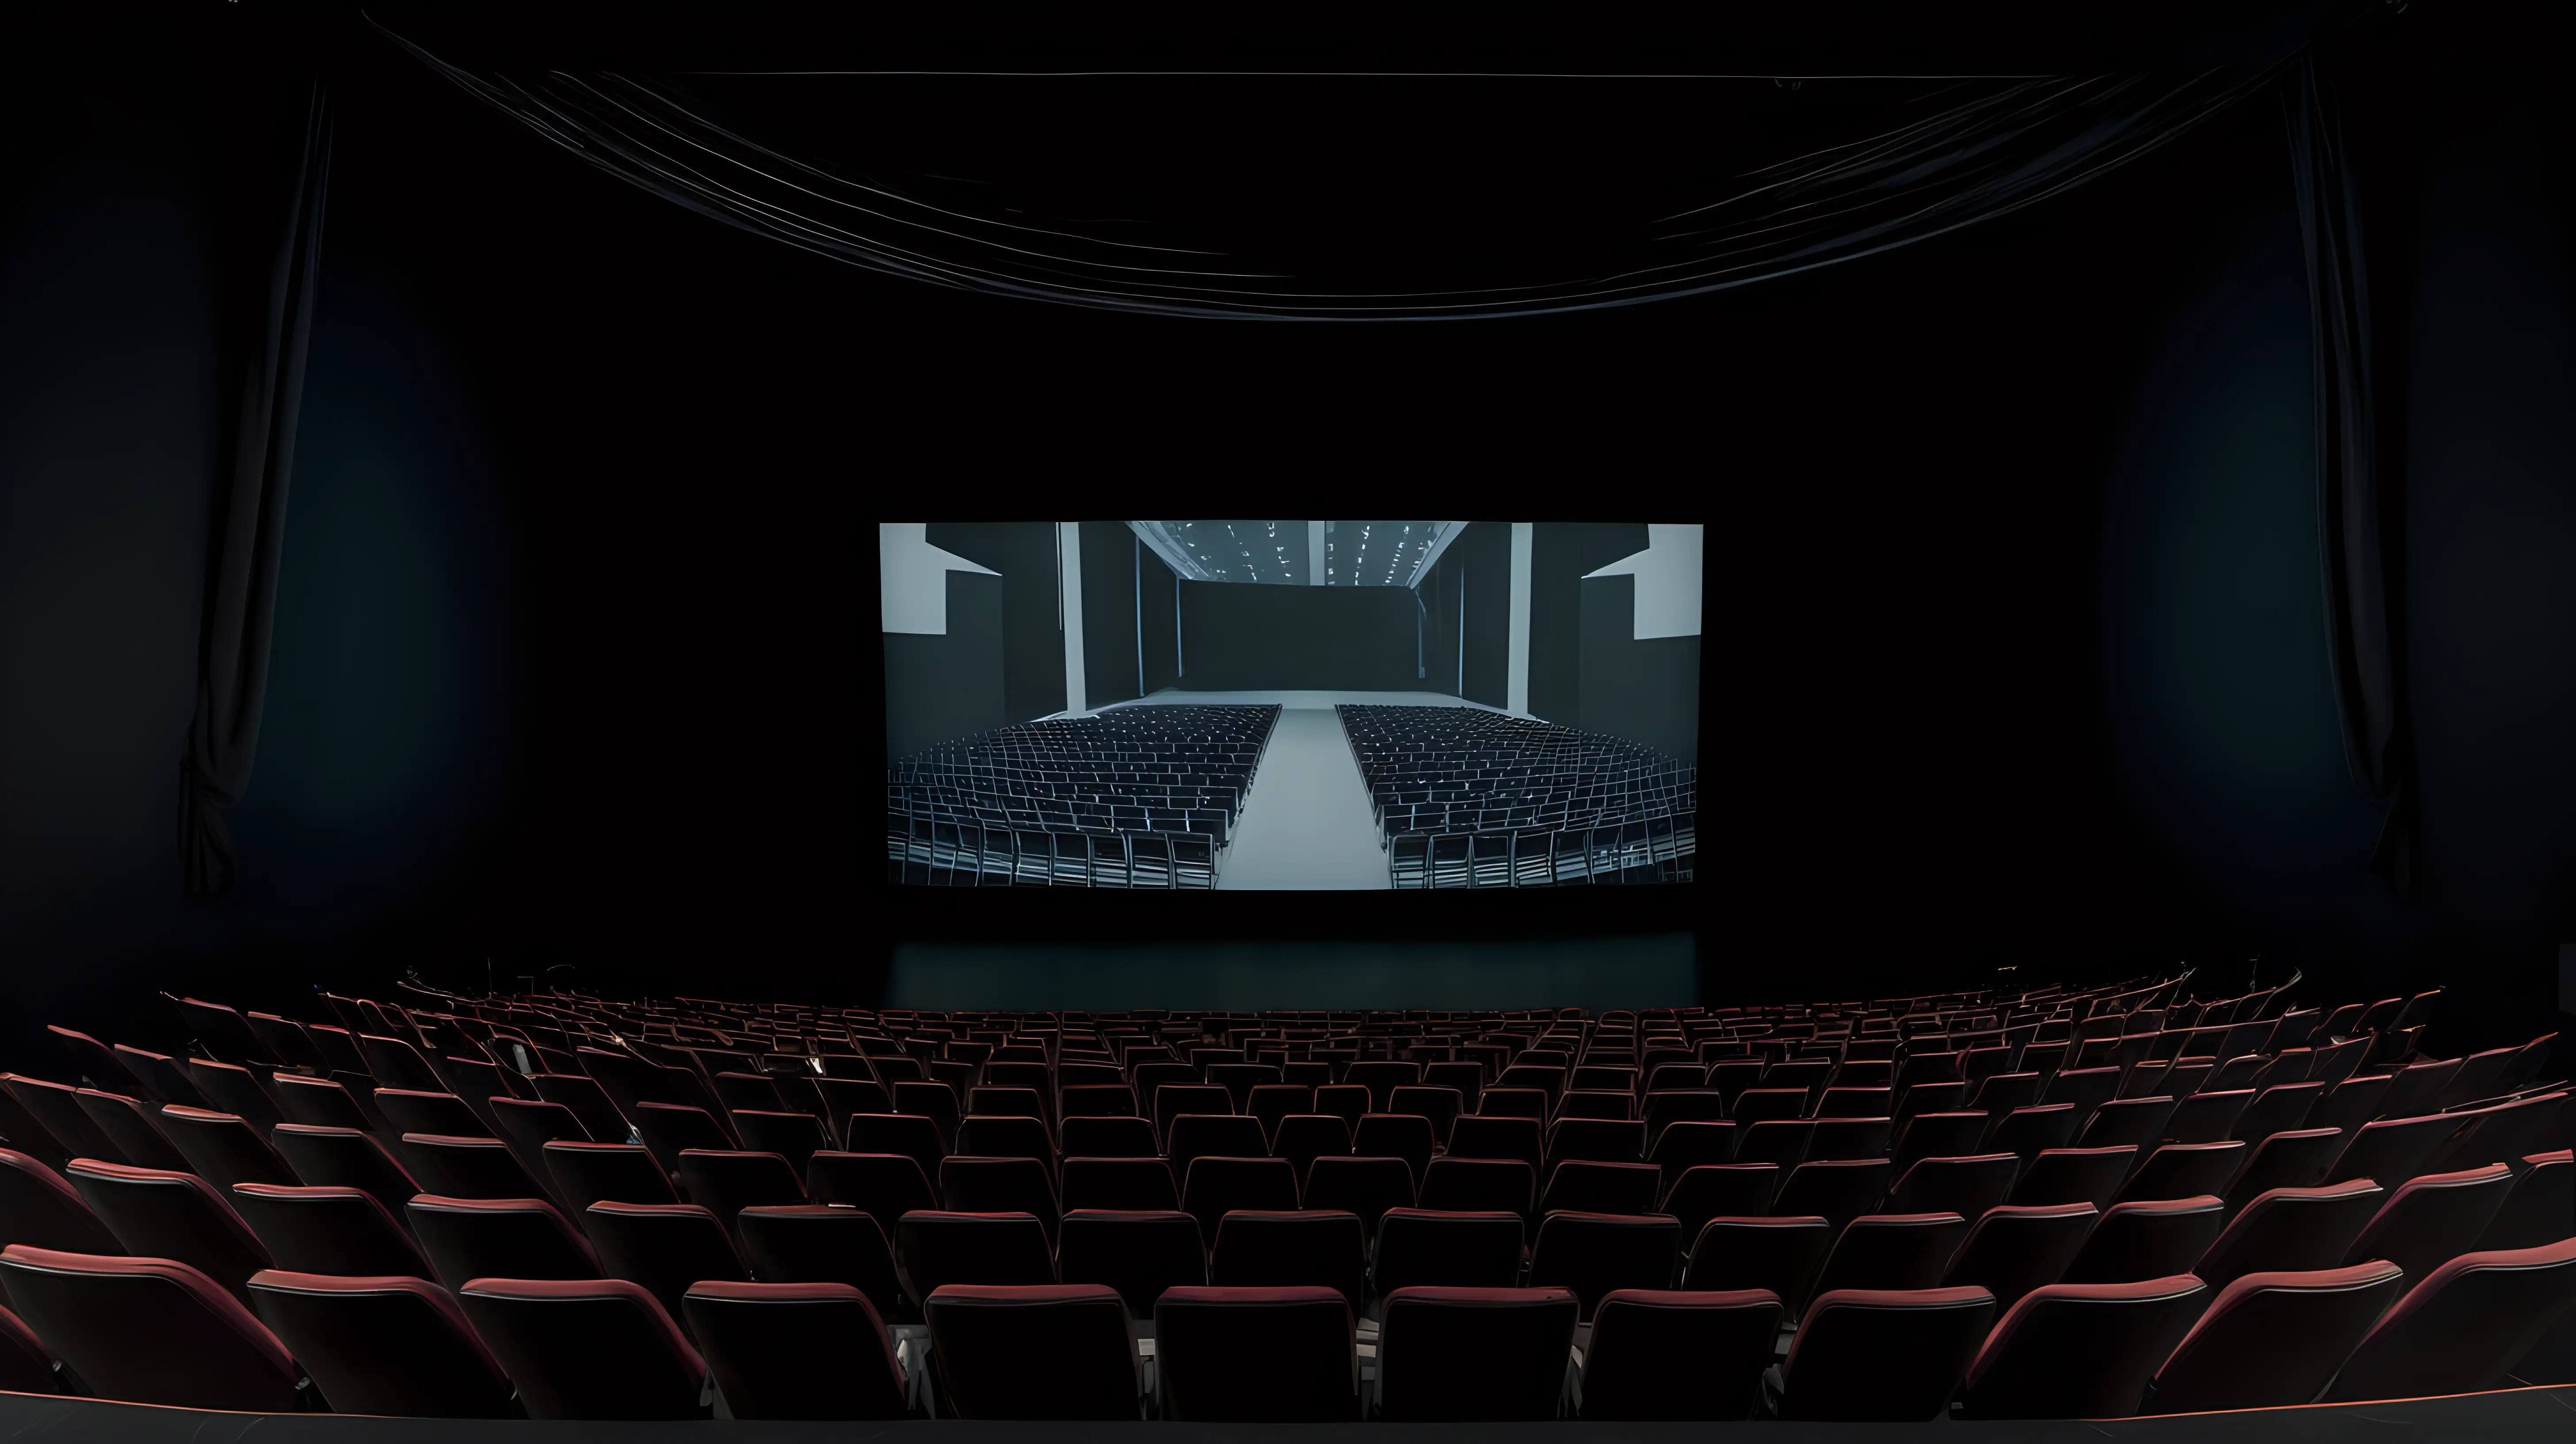 Large Black screen in art museum theater with tops of seats in foreground